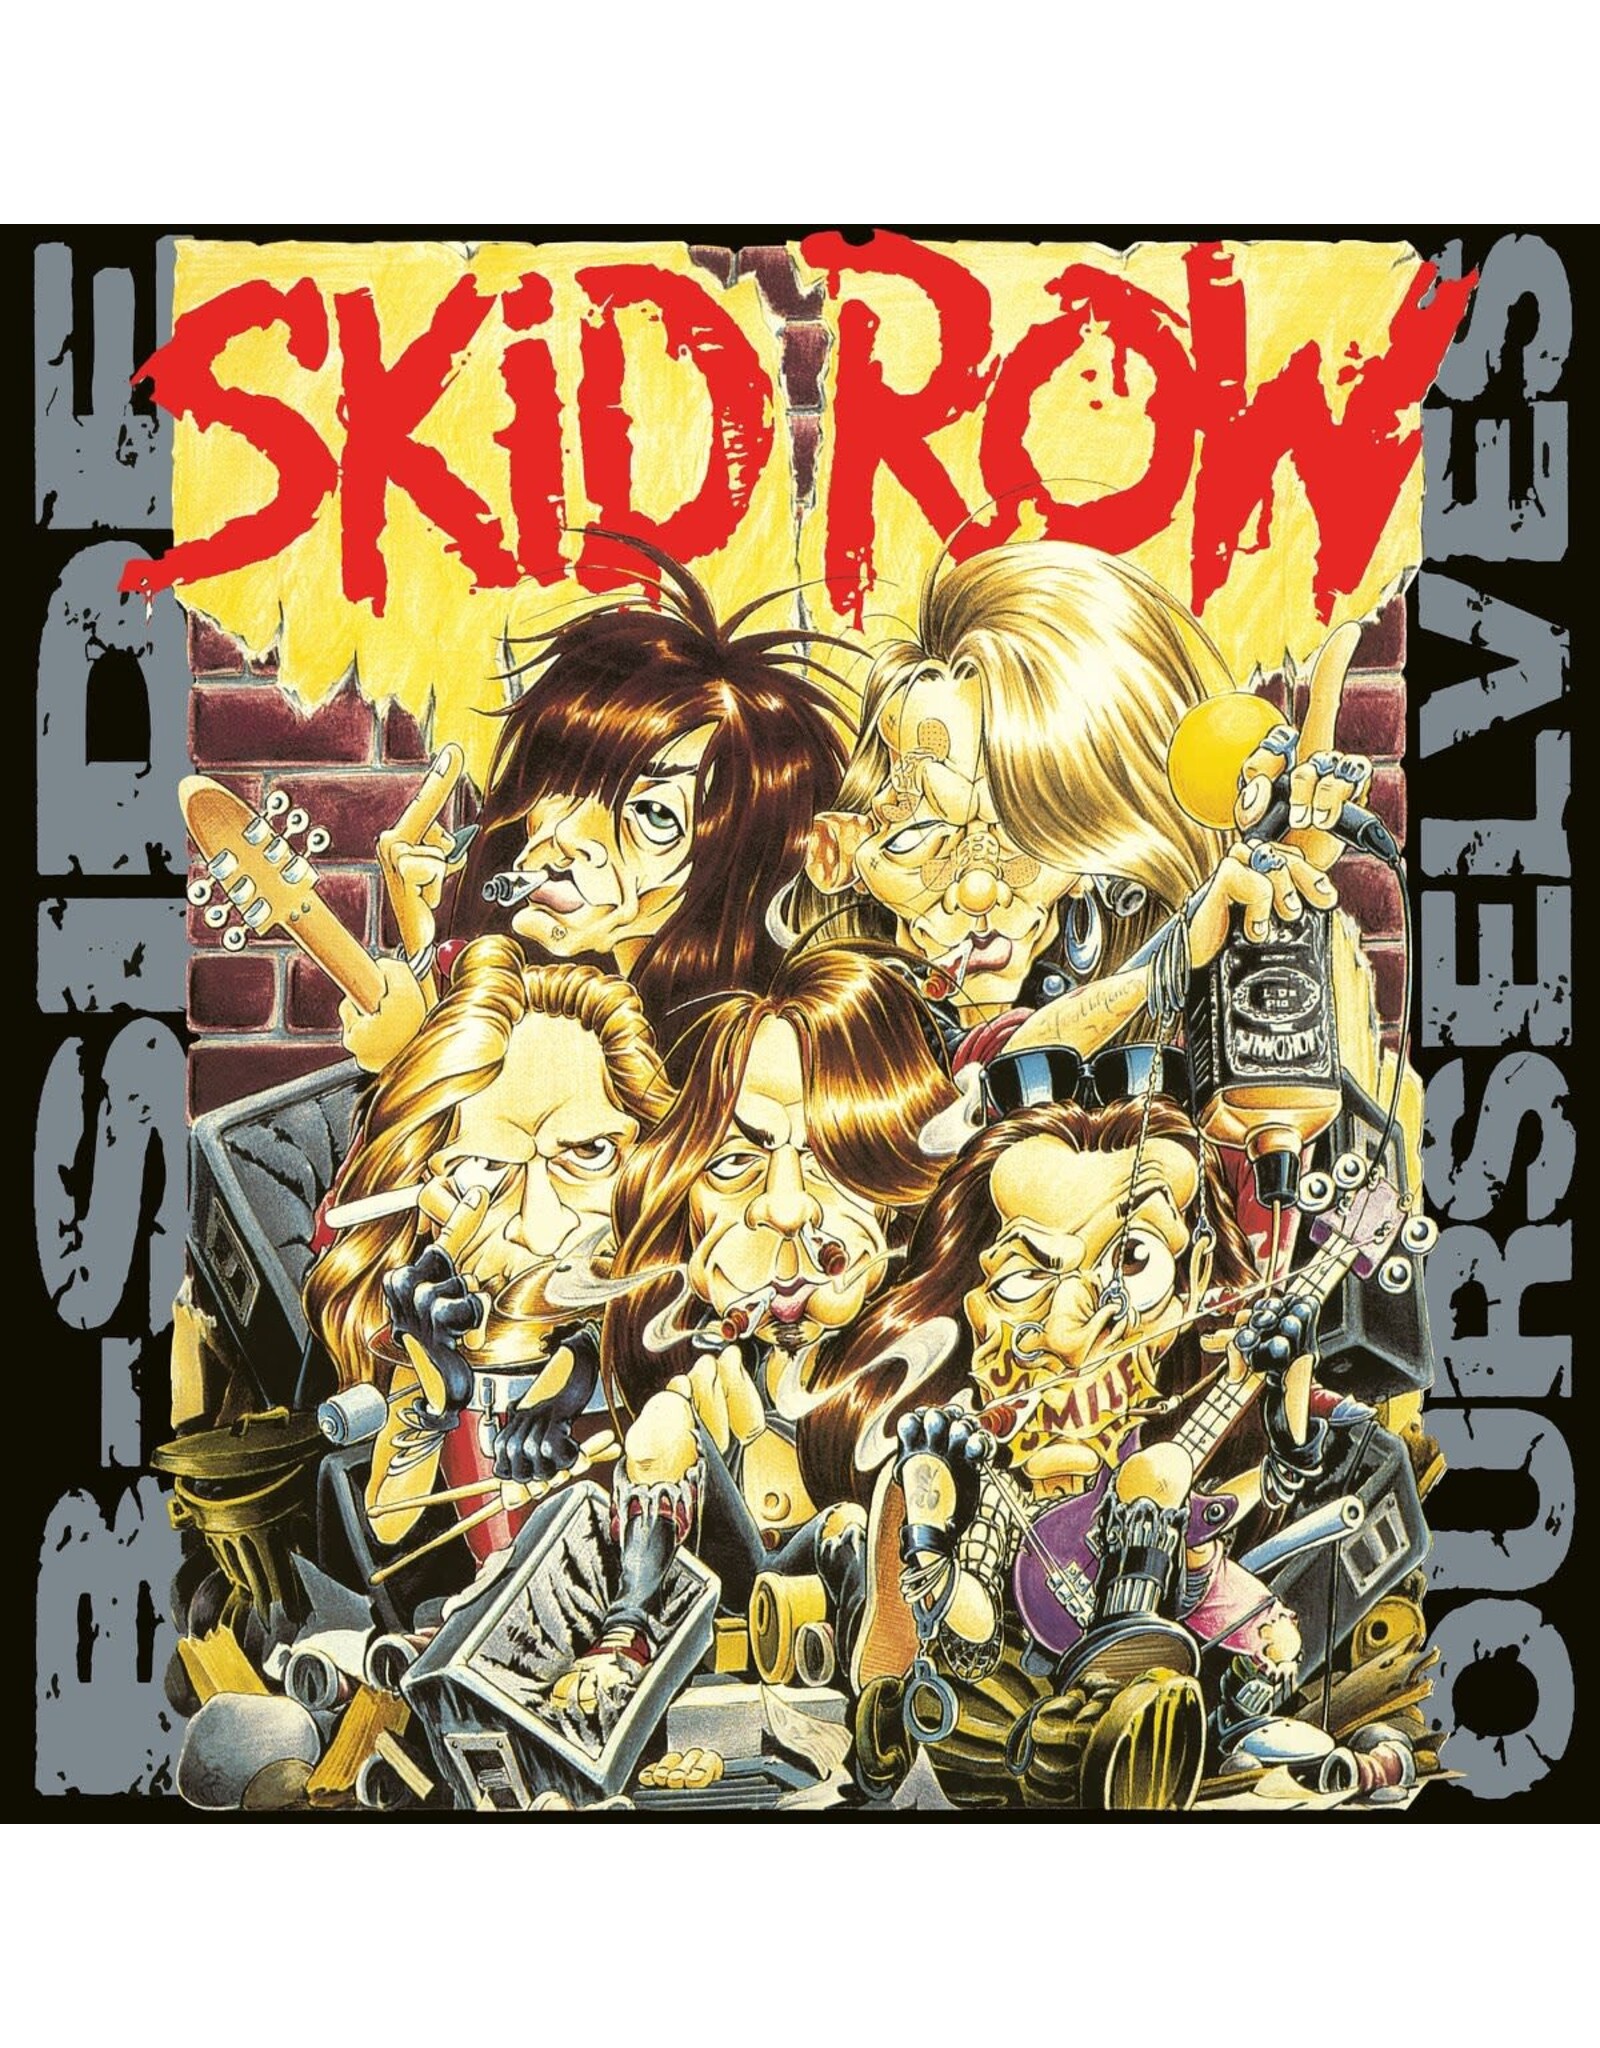 Skid Row - B-Side Ourselves EP (Exclusive Yellow Marbled Vinyl]